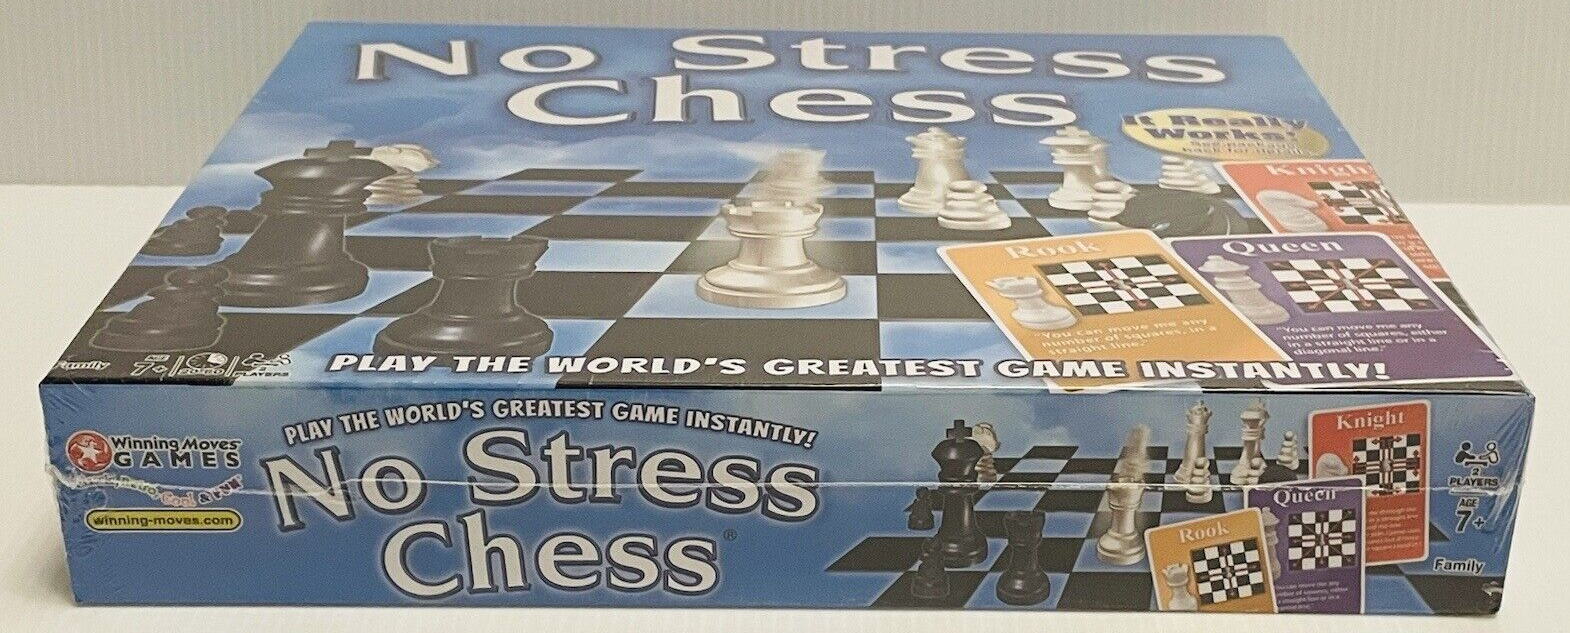 No Stress Chess Board Game - Winning Moves Games (2016) NEW Factory Sealed Winning Moves - фотография #2